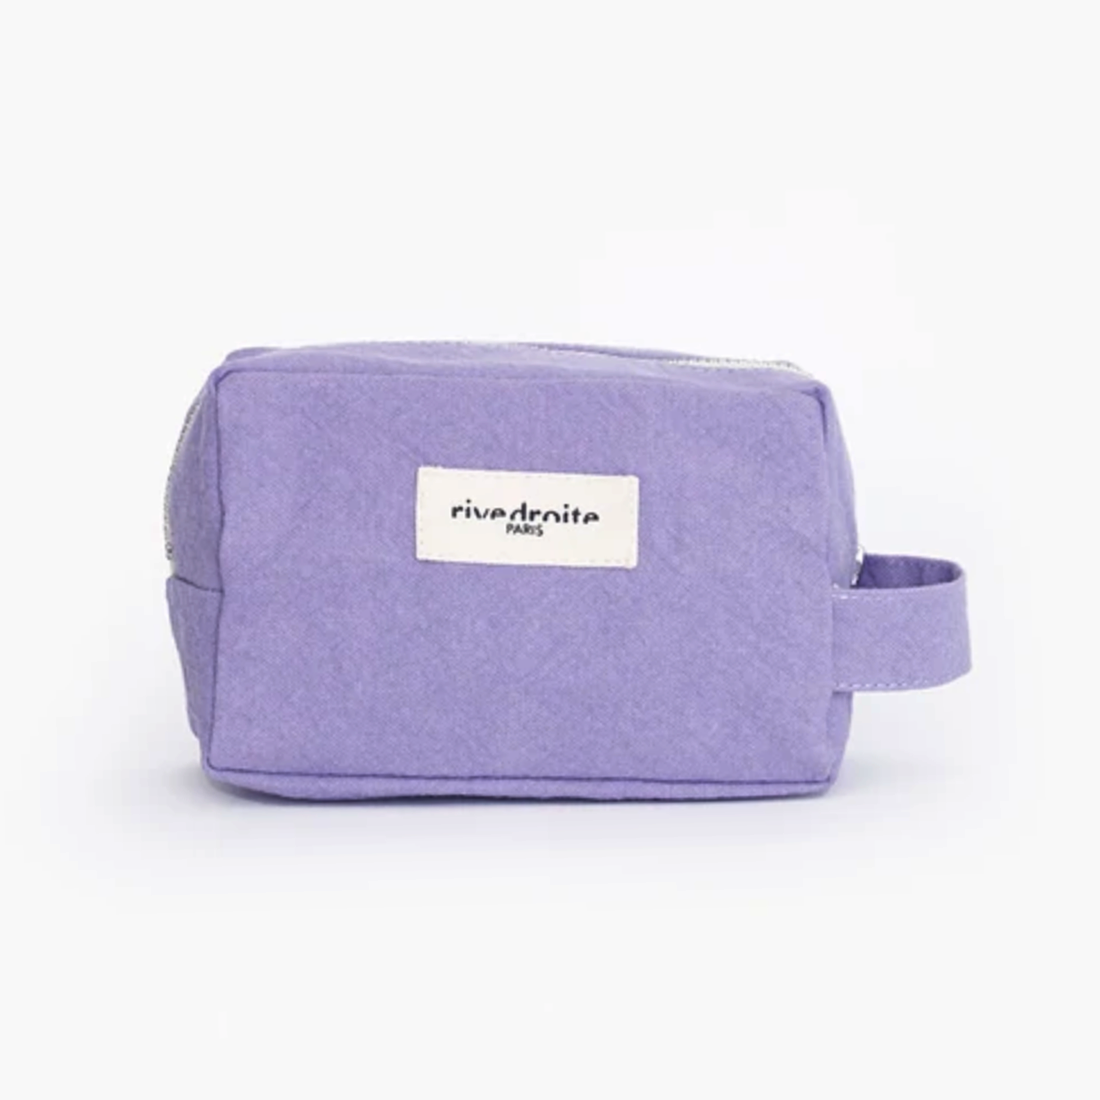 Rive Droite Lilac Recycled Cotton Make-up Bag - Tournelles